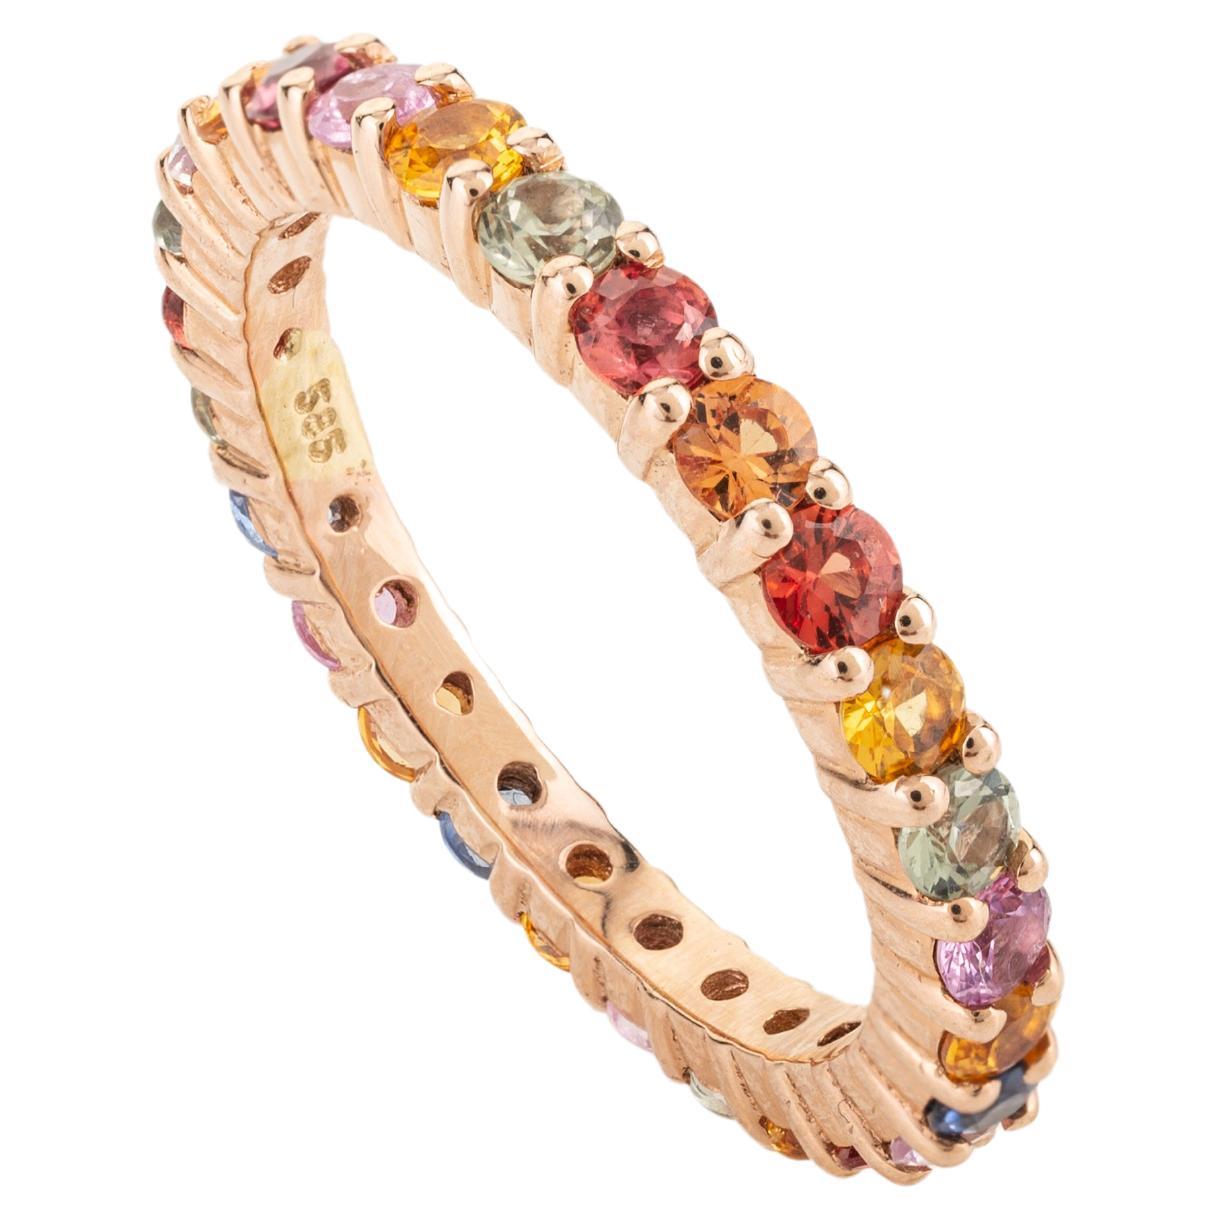 Stackable Multi Color Sapphire Eternity Band Ring Crafted in 14 Solid Rose Gold